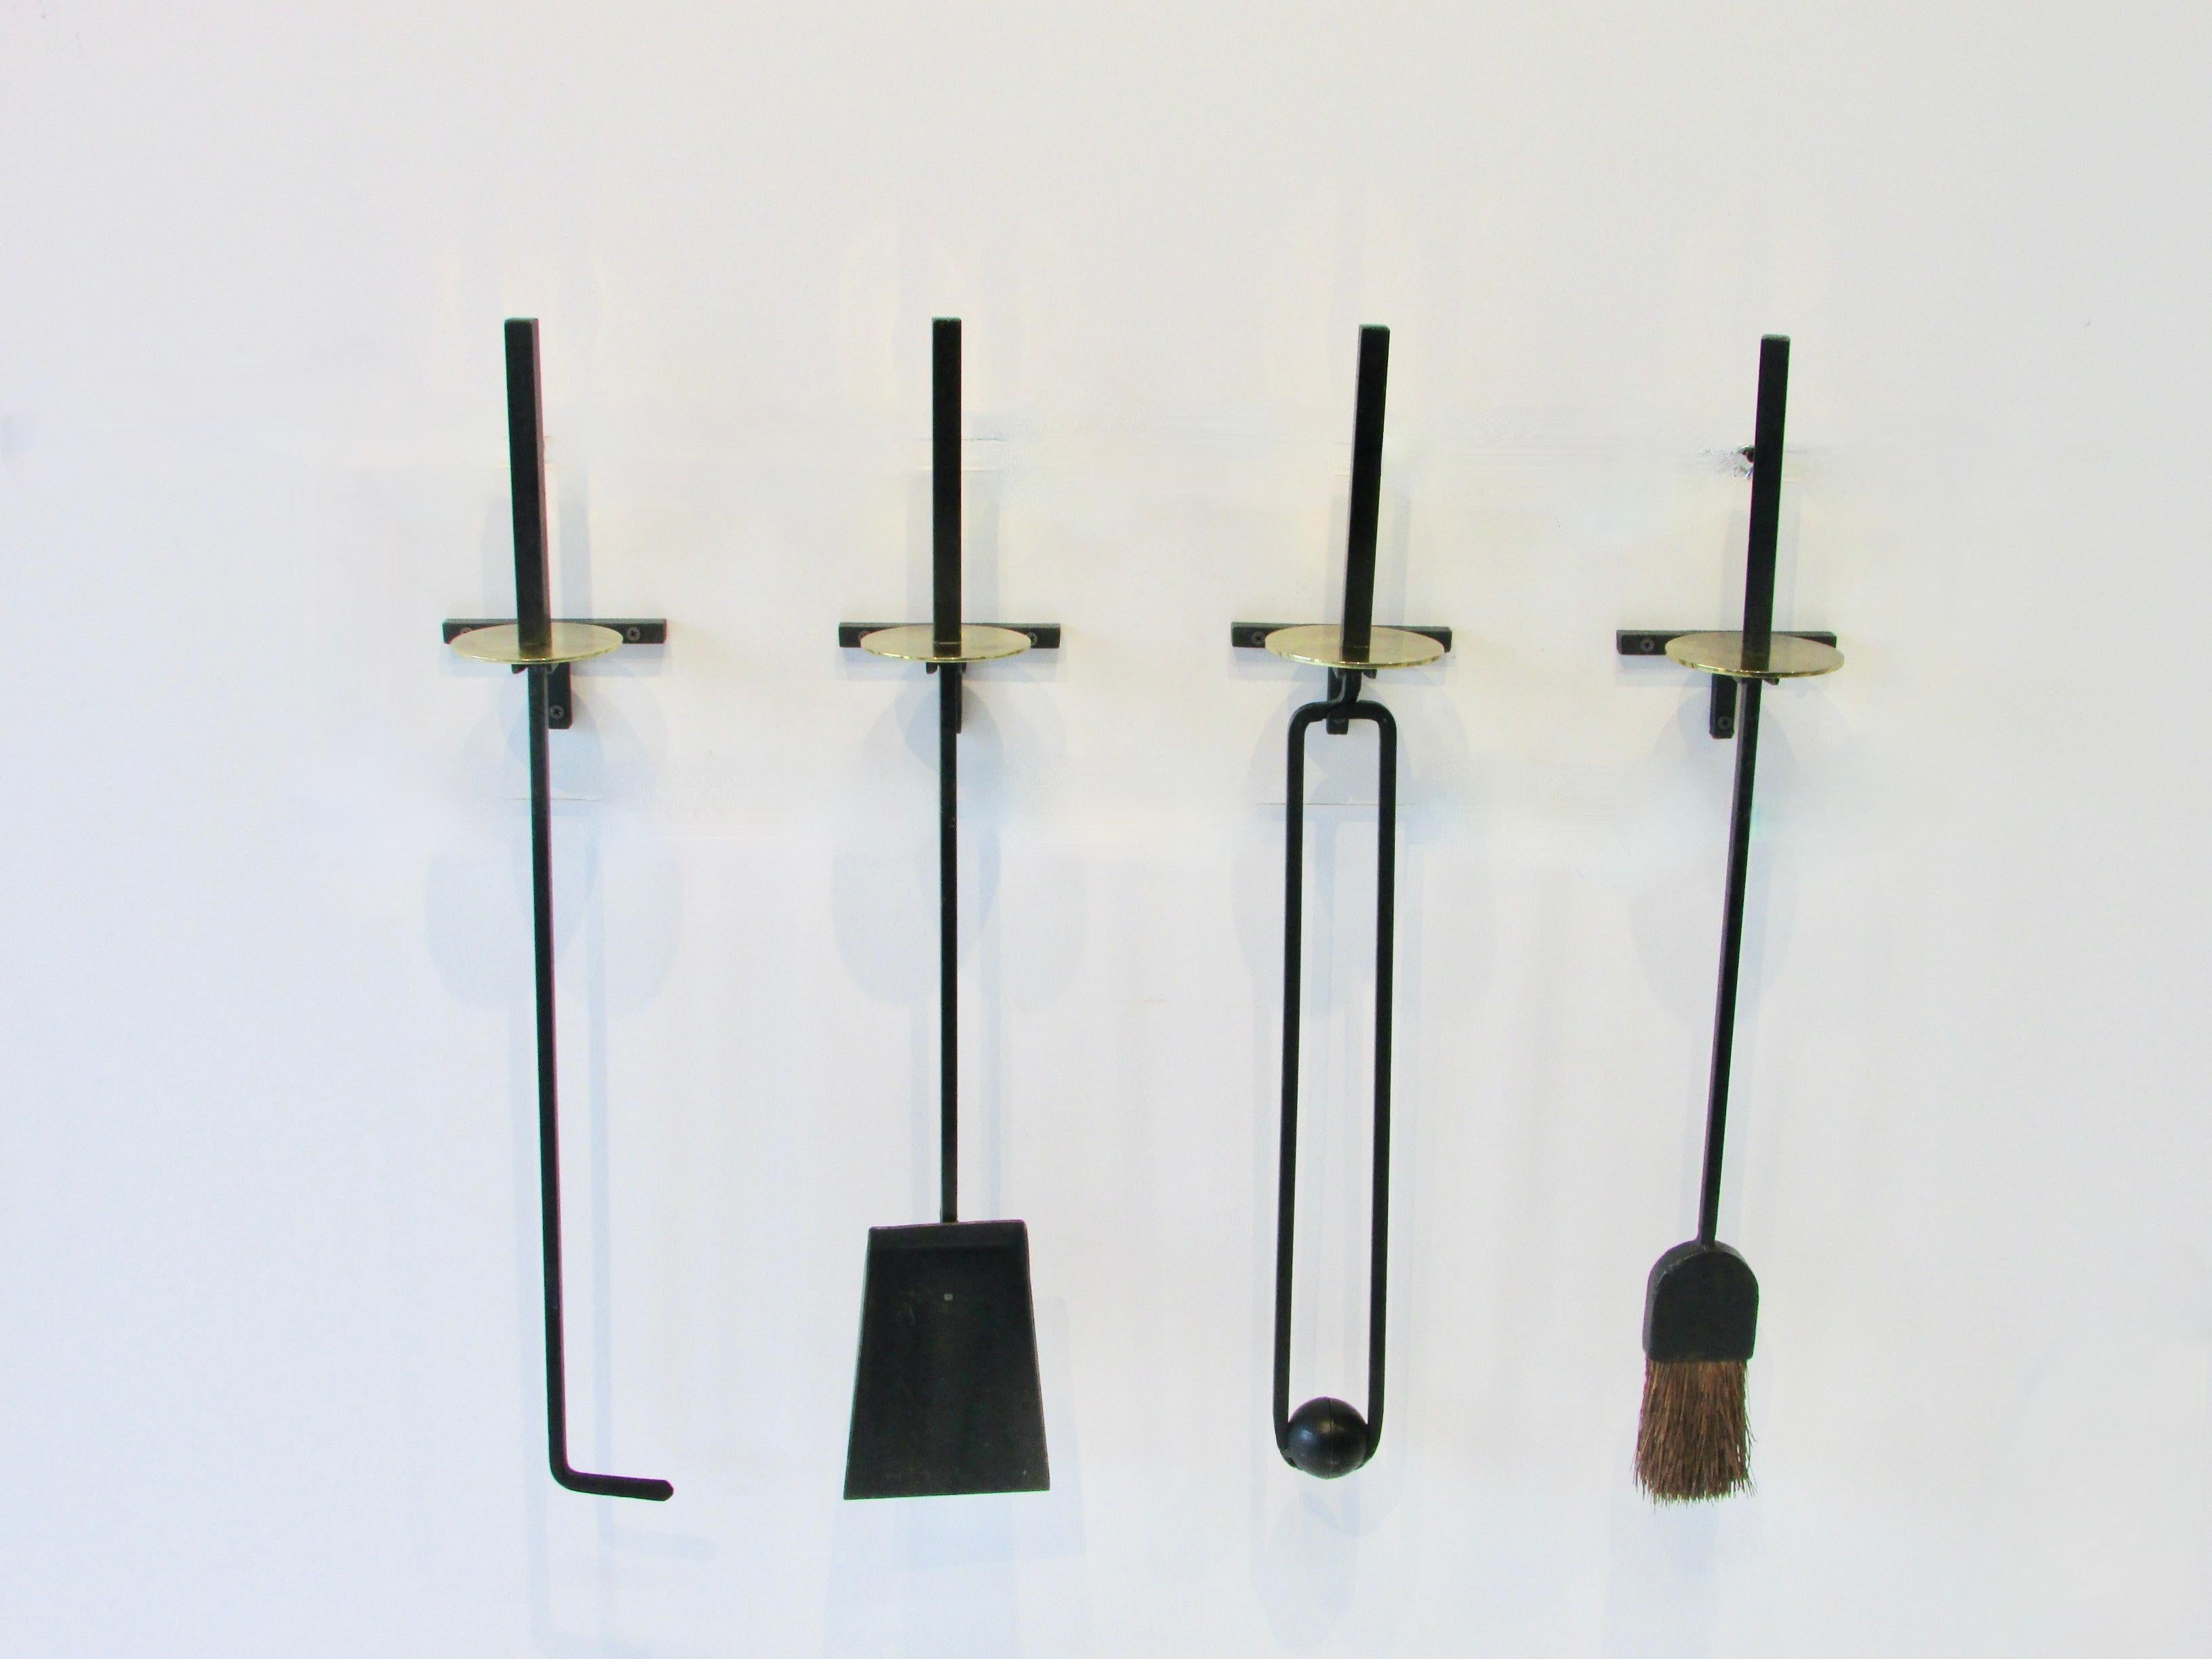 Rare four piece set of Mel Bogart wall mounted fire place tools. Square stock wrought iron tools with brass disc accent. Tools mount into individual wall mount wrought iron holders.